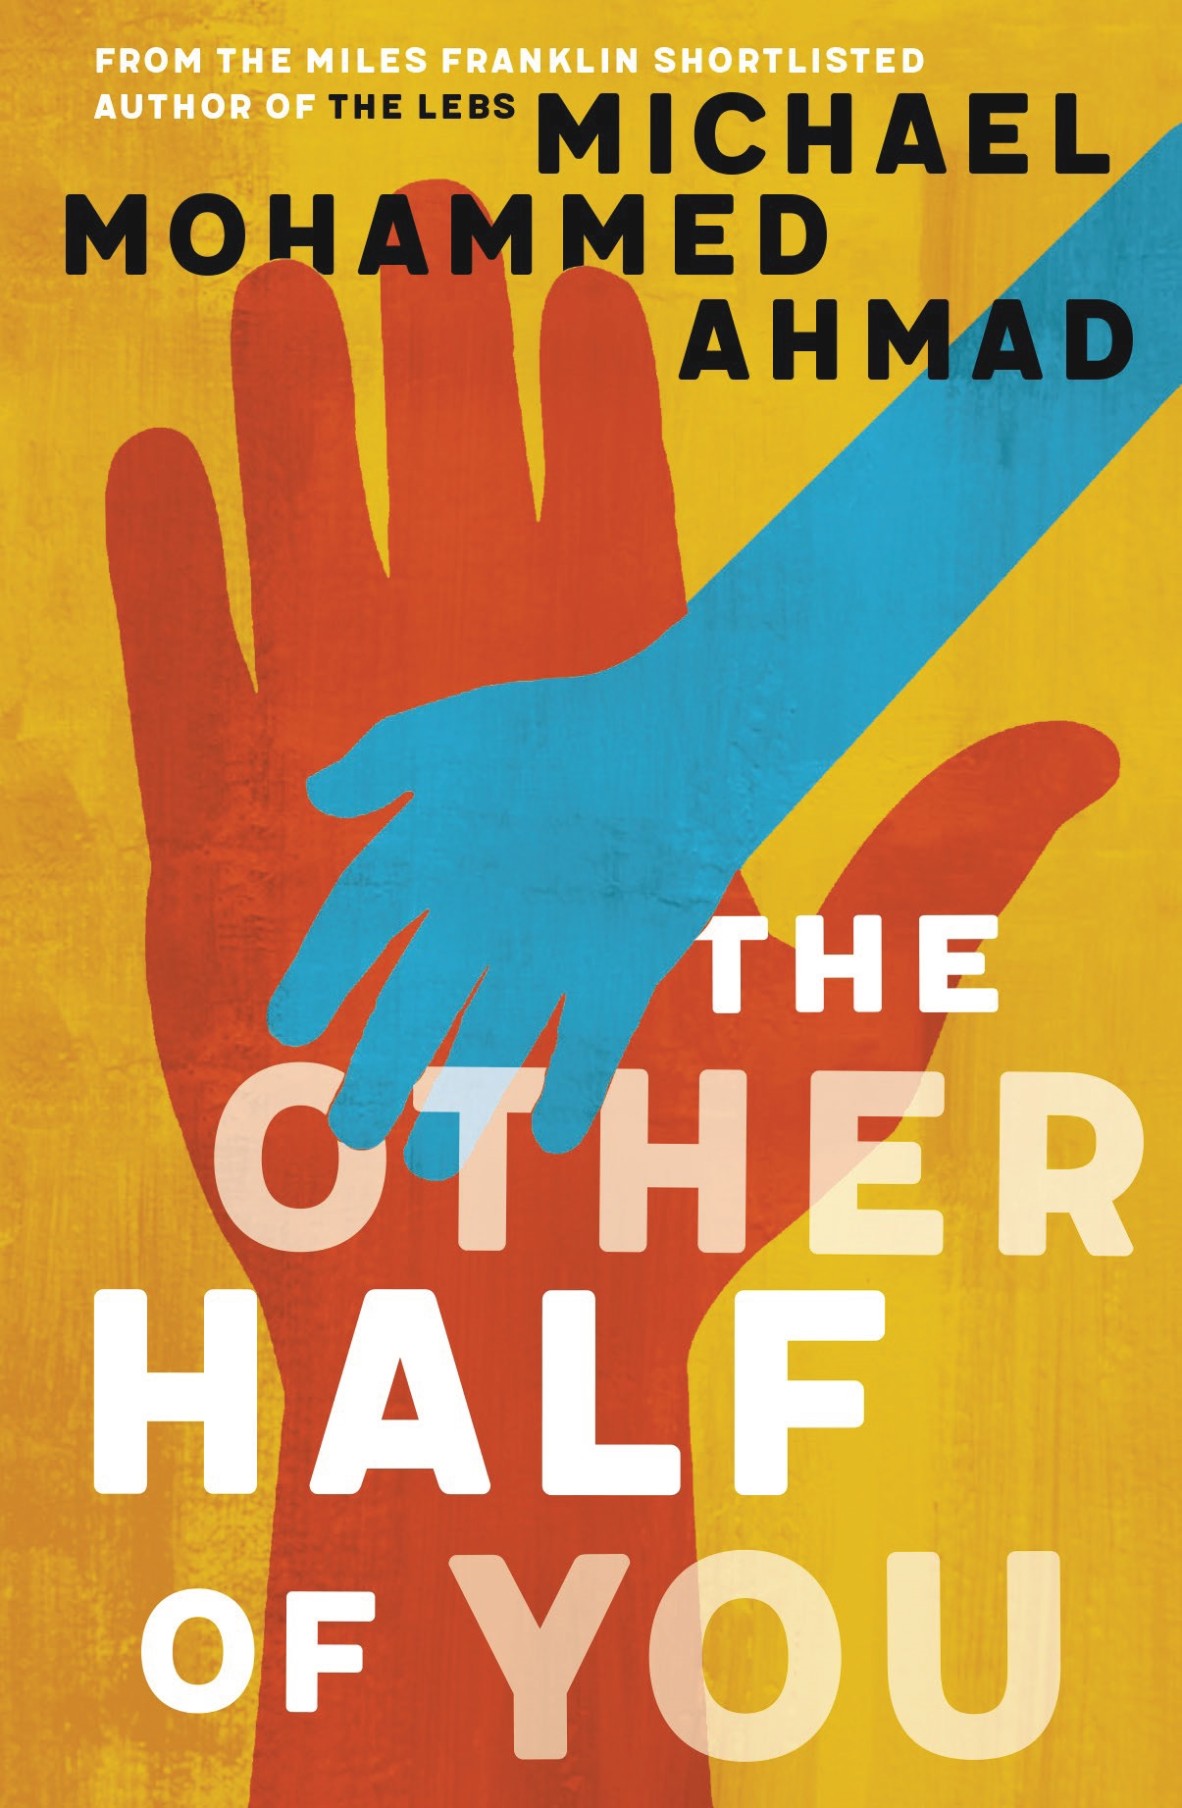 Cover of The Other Half of You by Michael Mohammed Ahmad Its a yellow illustrated cover with a large orange hand and a small blue hand placed over it